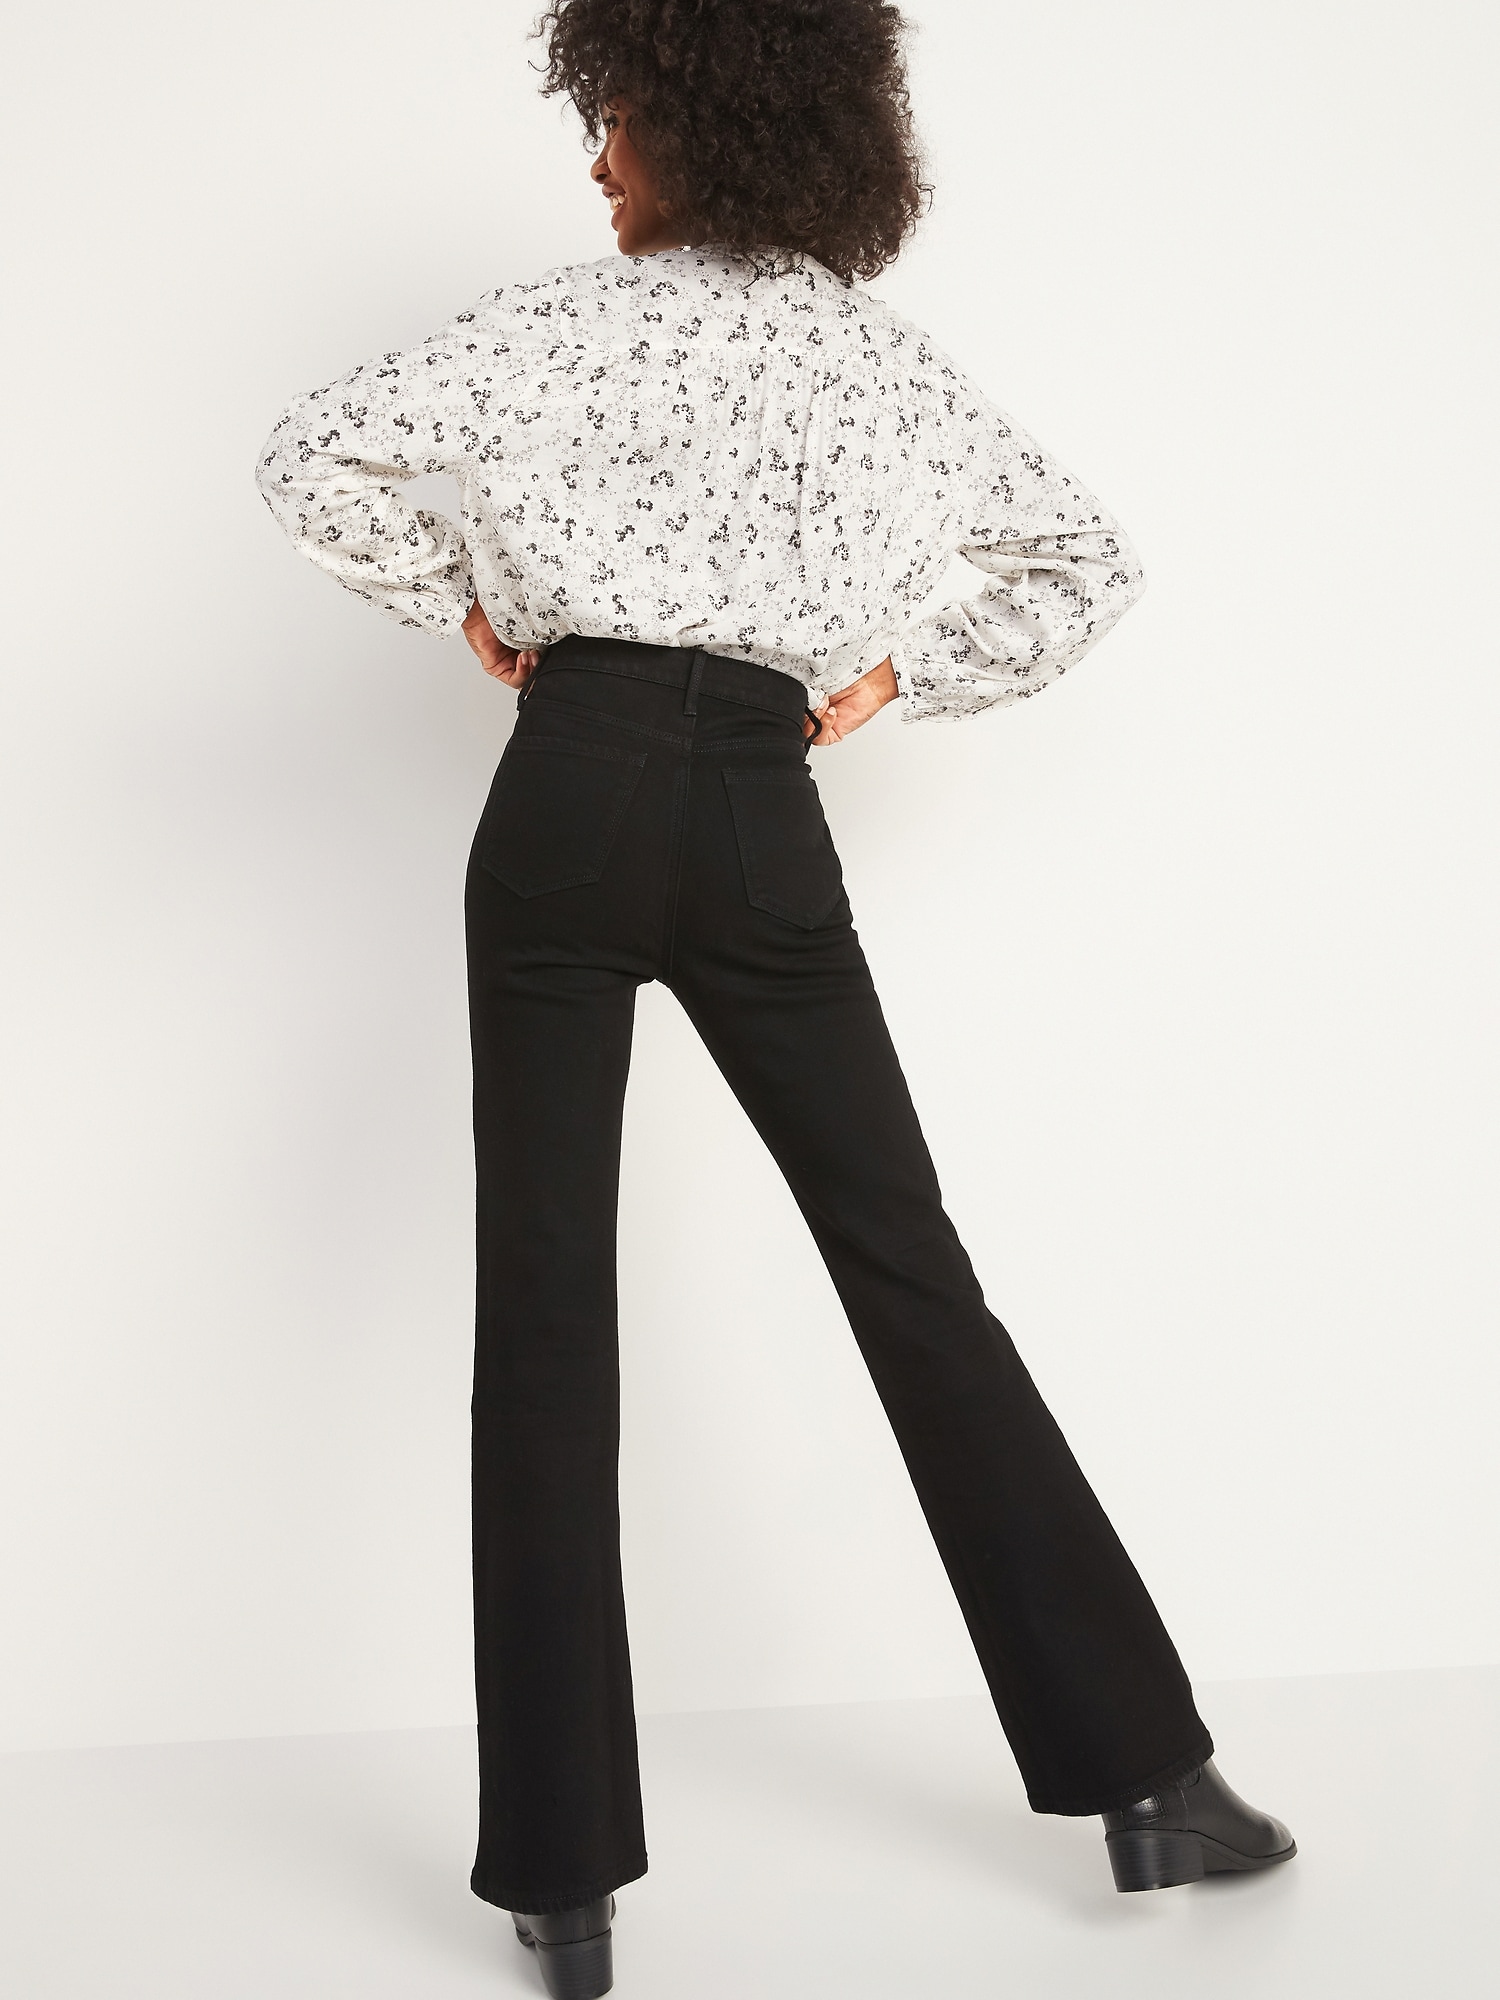 Extra High-Waisted Flare Black Jeans for Women